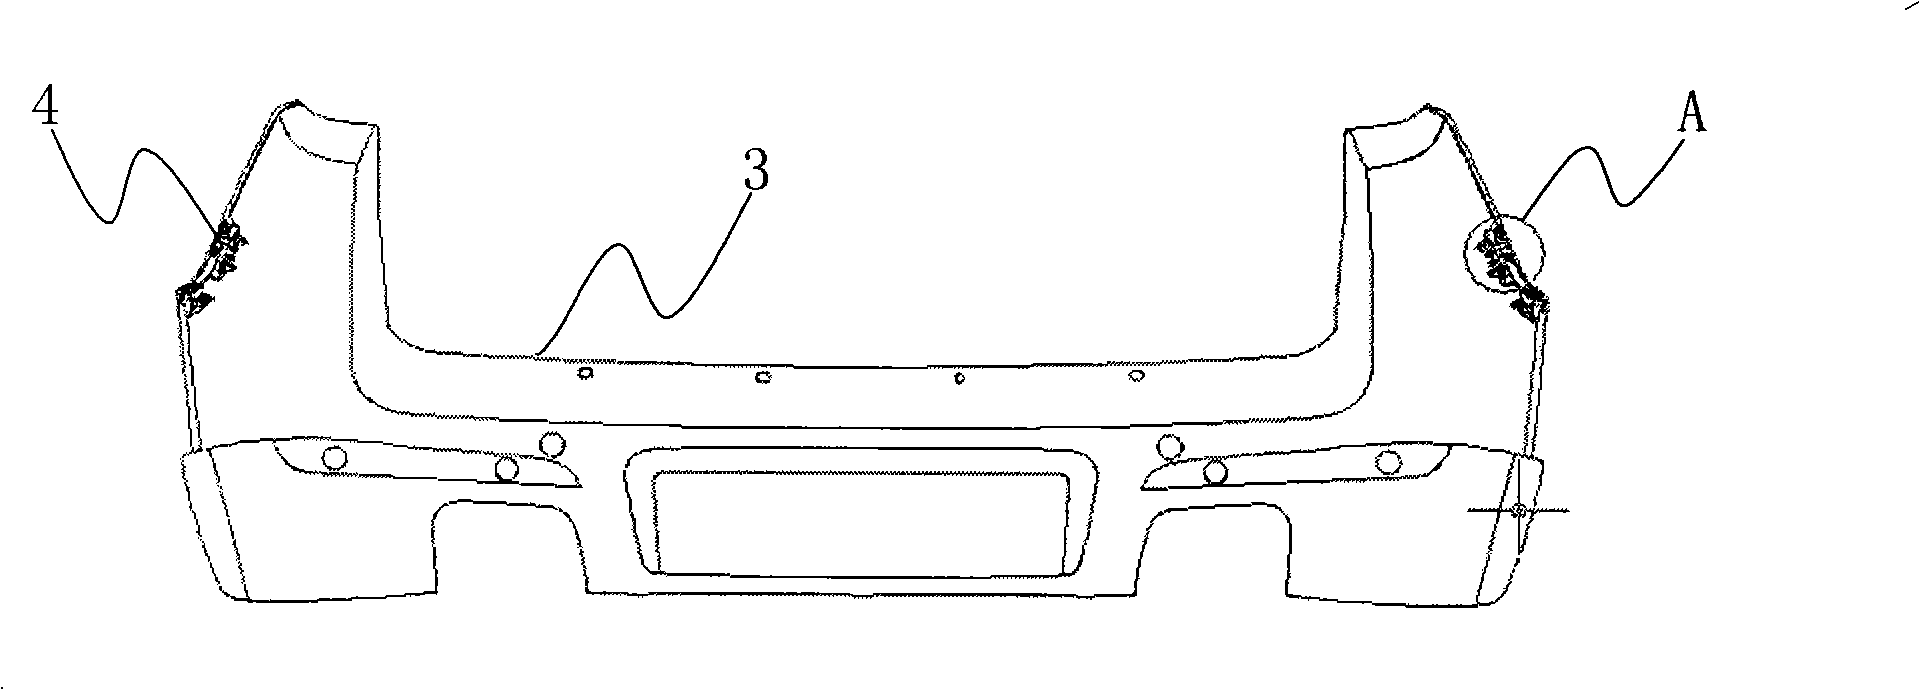 Fender-guard mounting structure